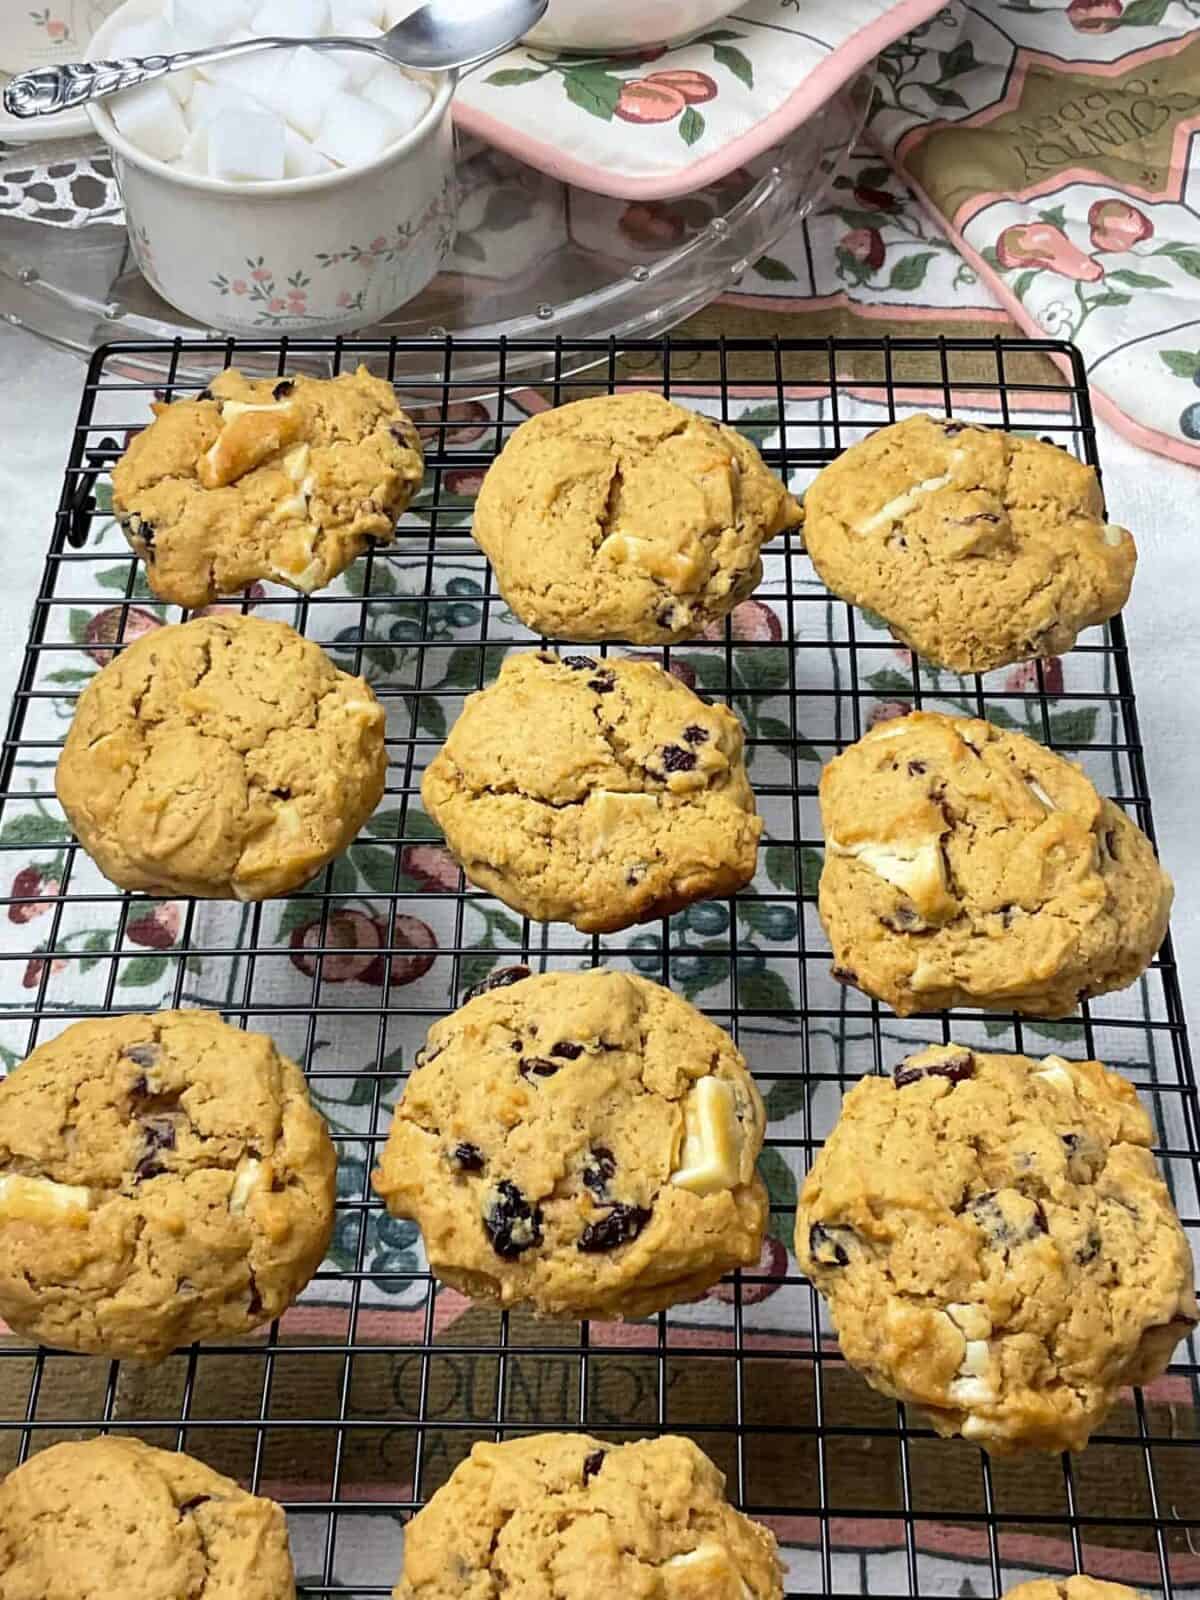 A batch of baked cookies on a cooling rack.